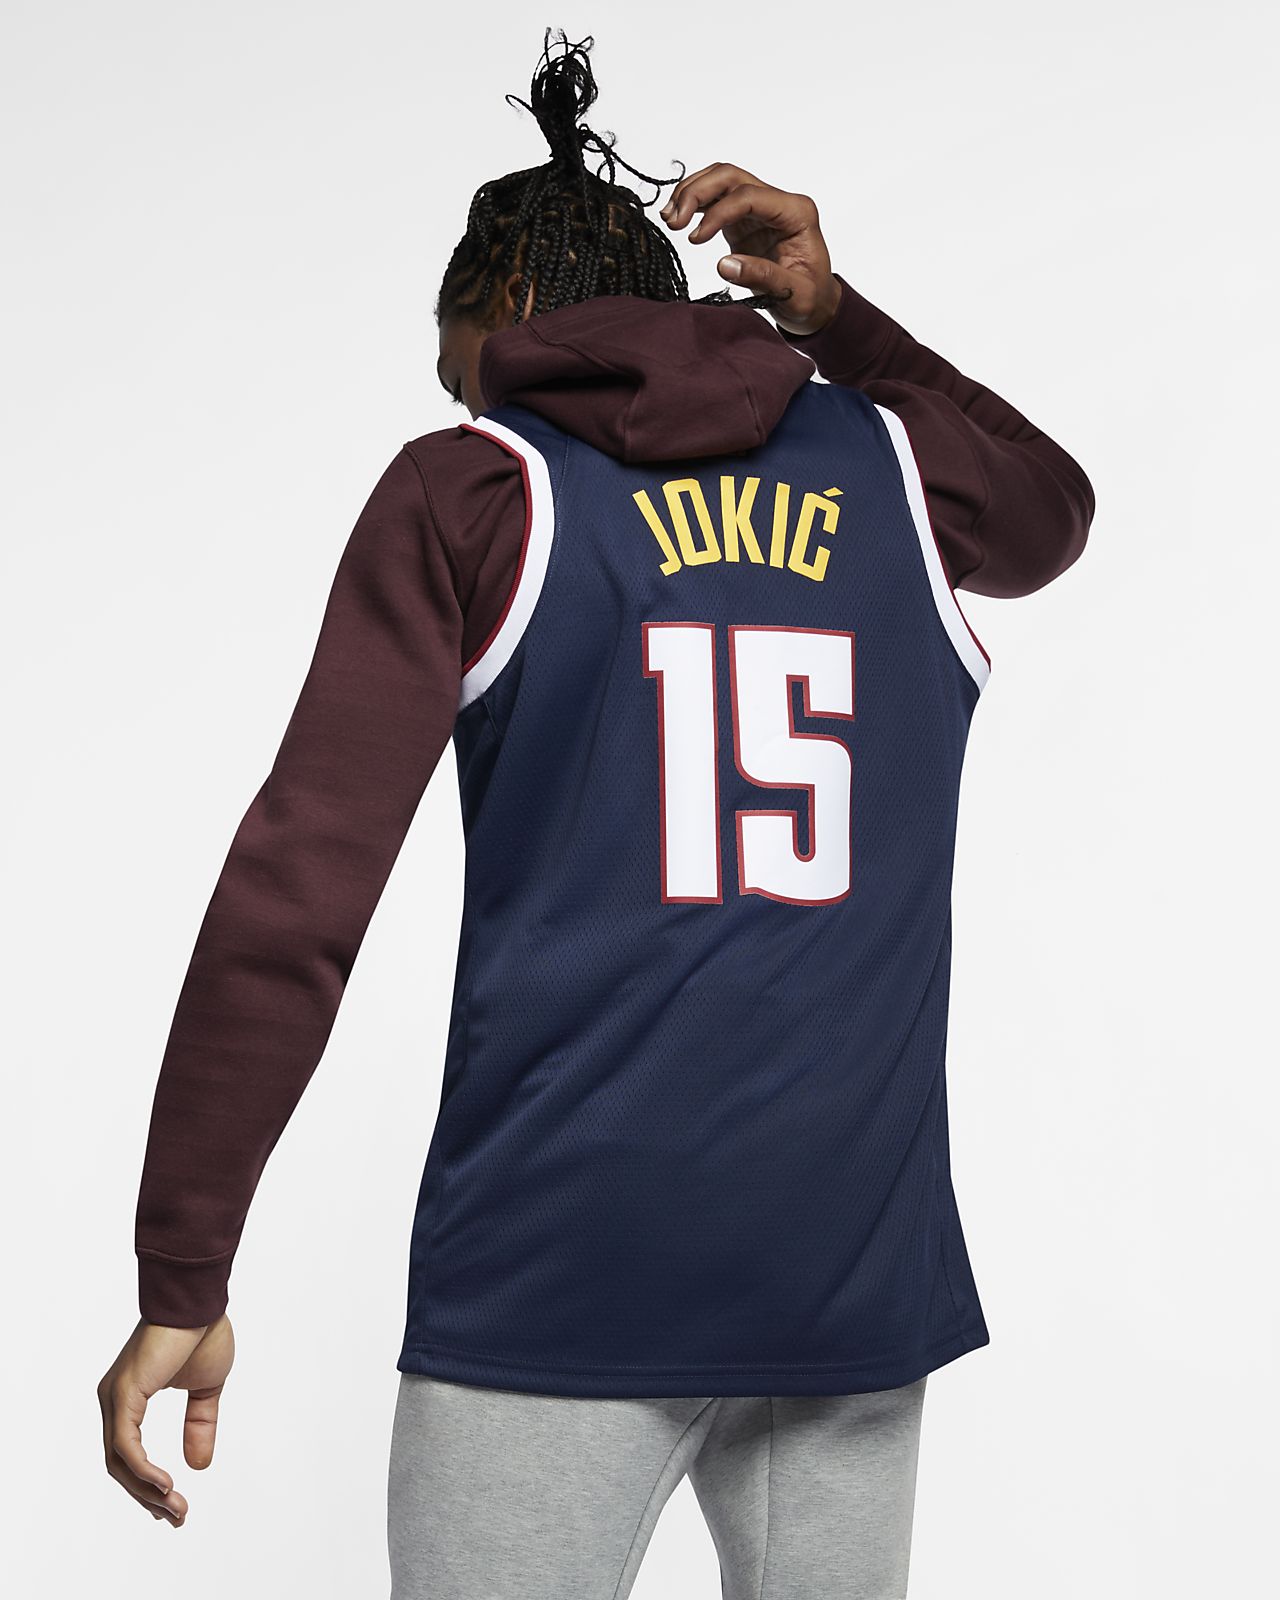 nuggets sleeved jersey